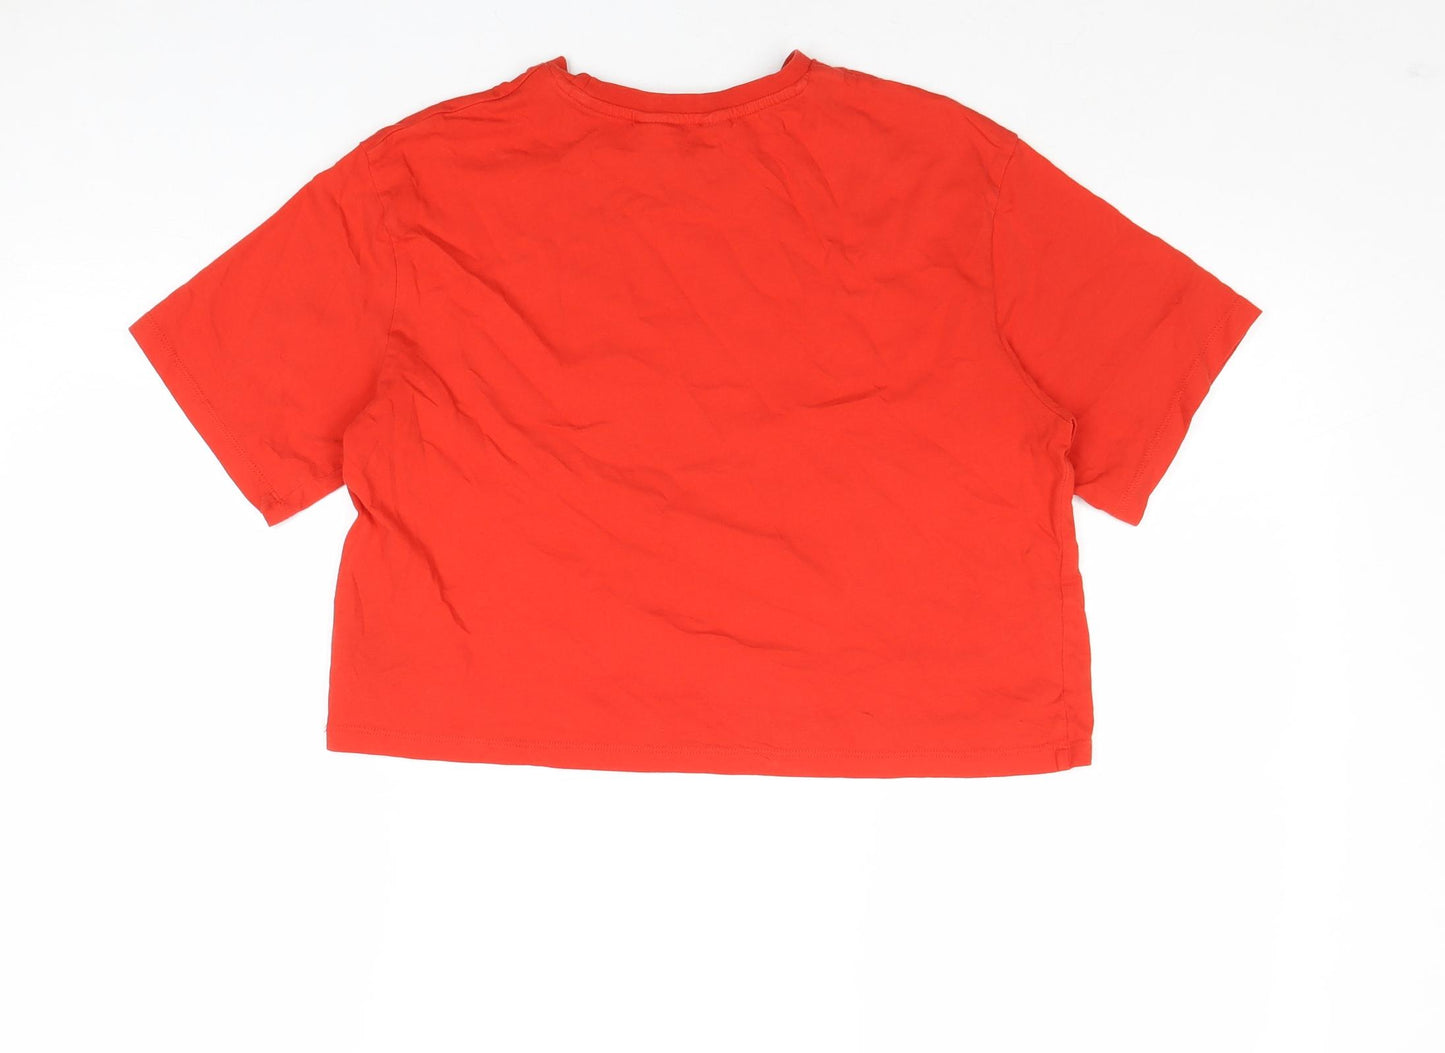 H&M Girls Red Cotton Basic T-Shirt Size 13-14 Years Round Neck Pullover - Boston